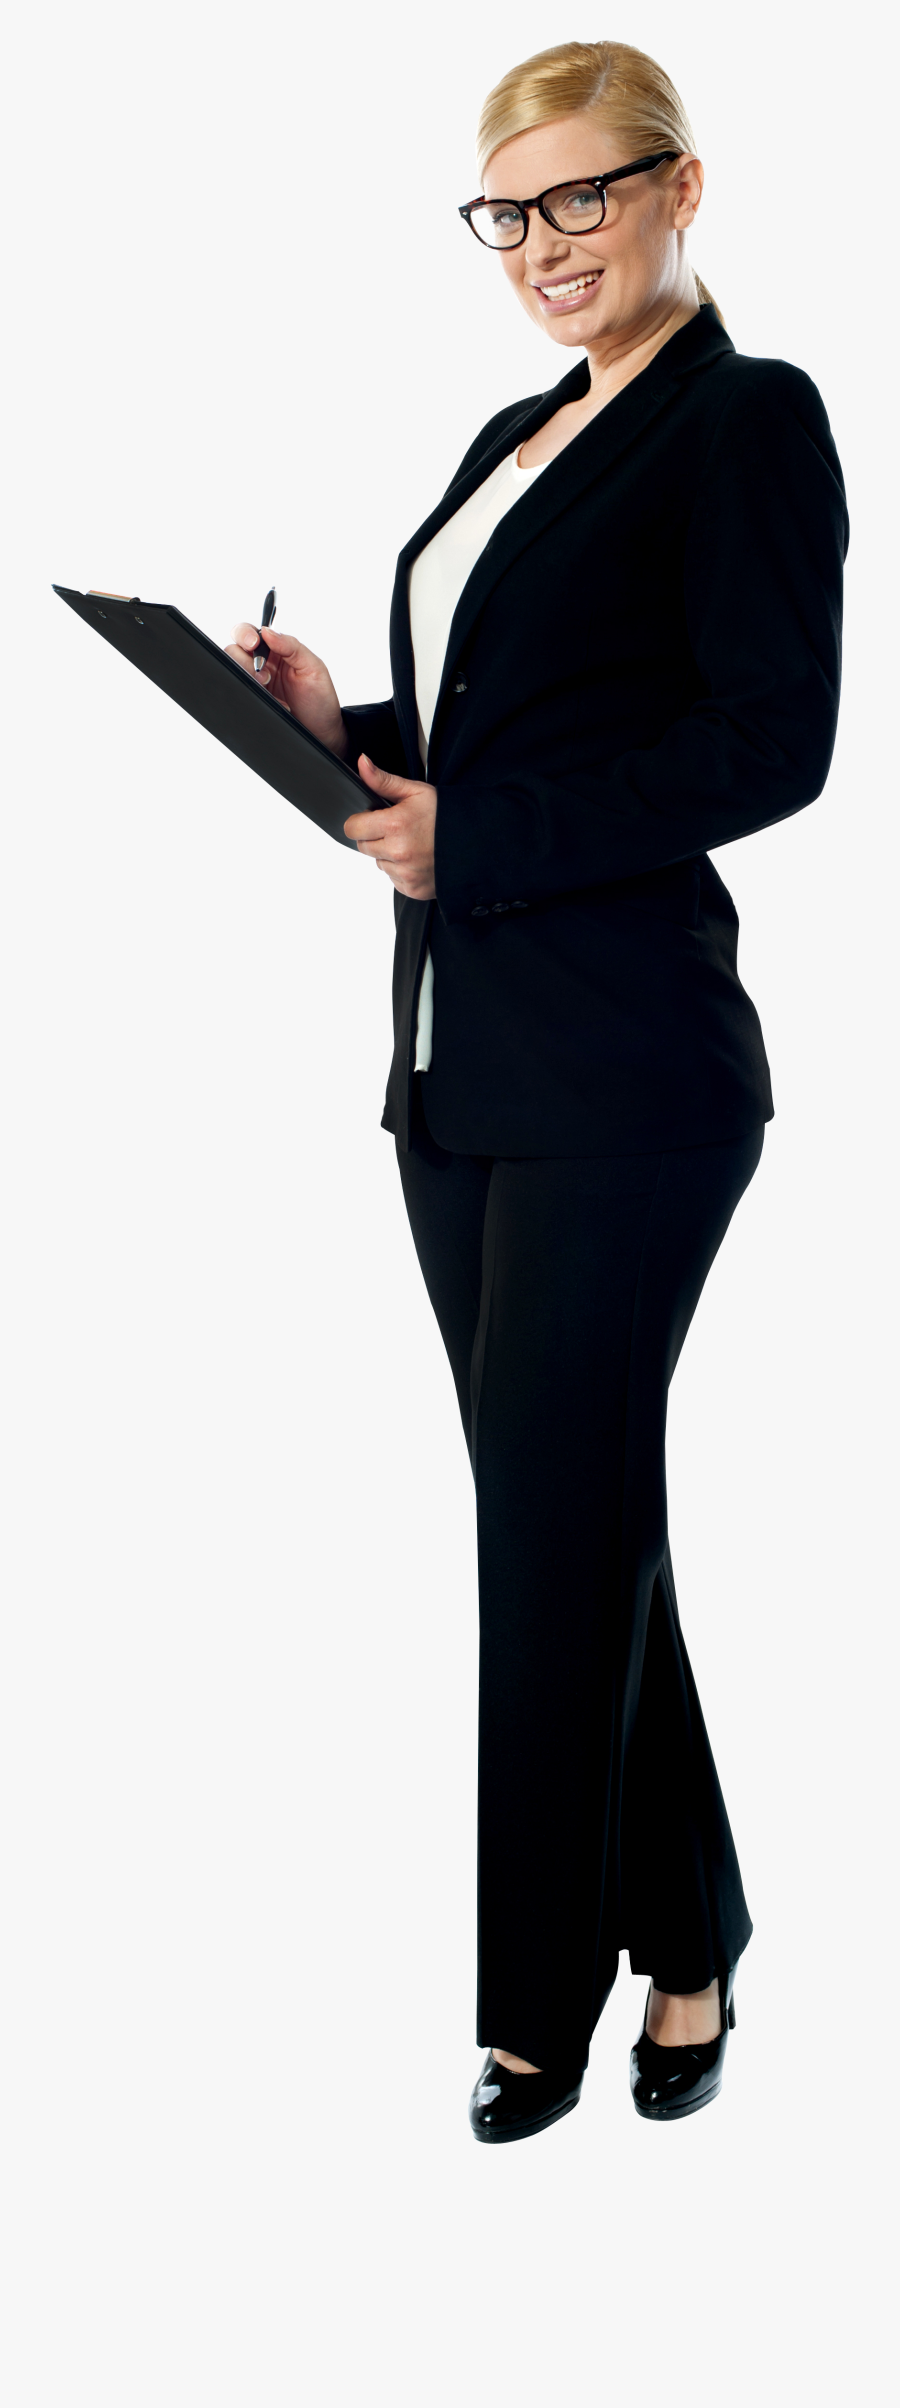 Business Women Png Image - Business Woman Standing Png, Transparent Clipart